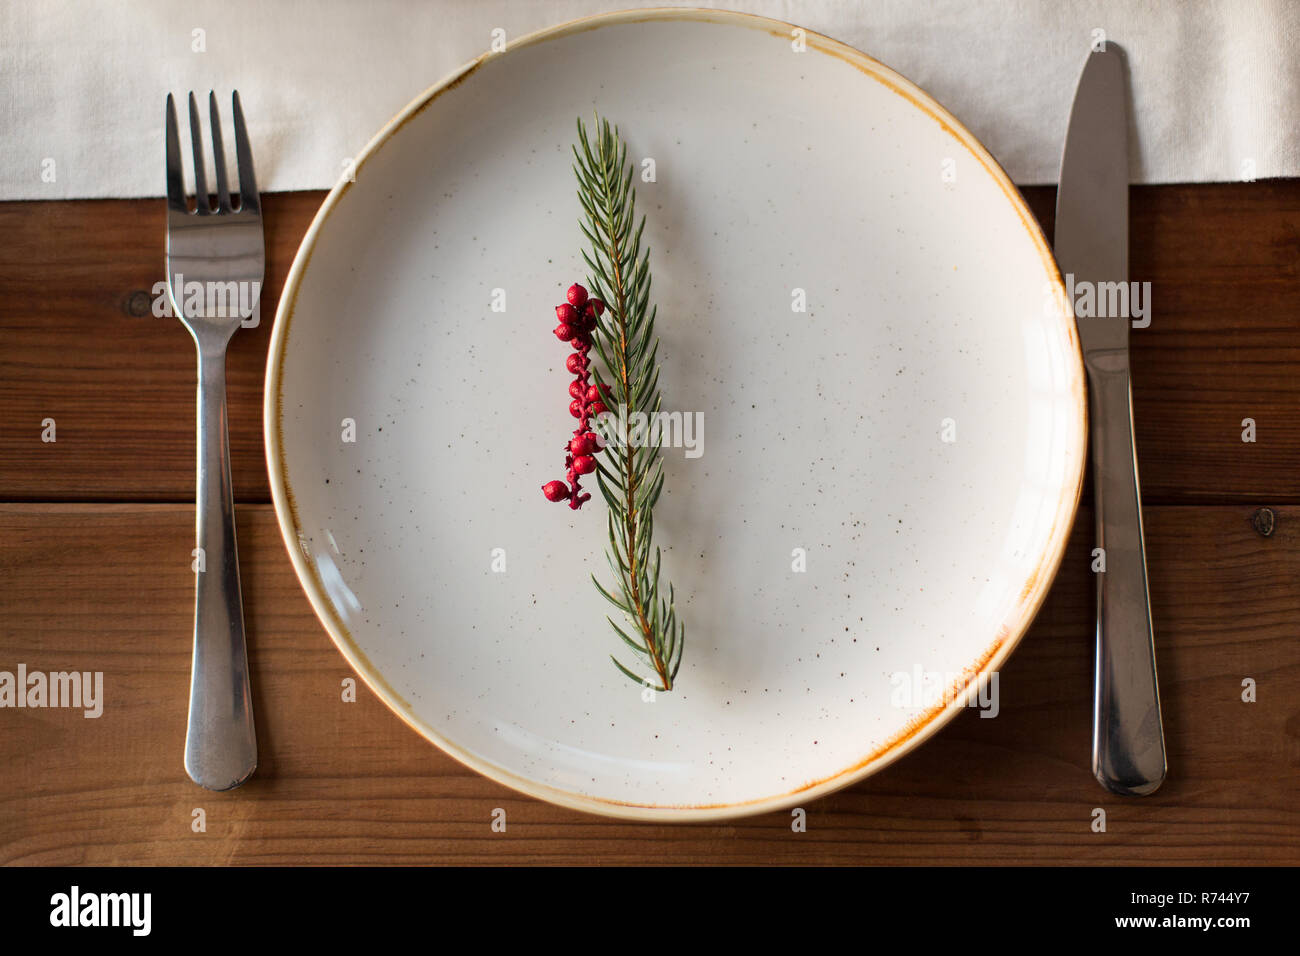 table served for christmas dinner at home Stock Photo